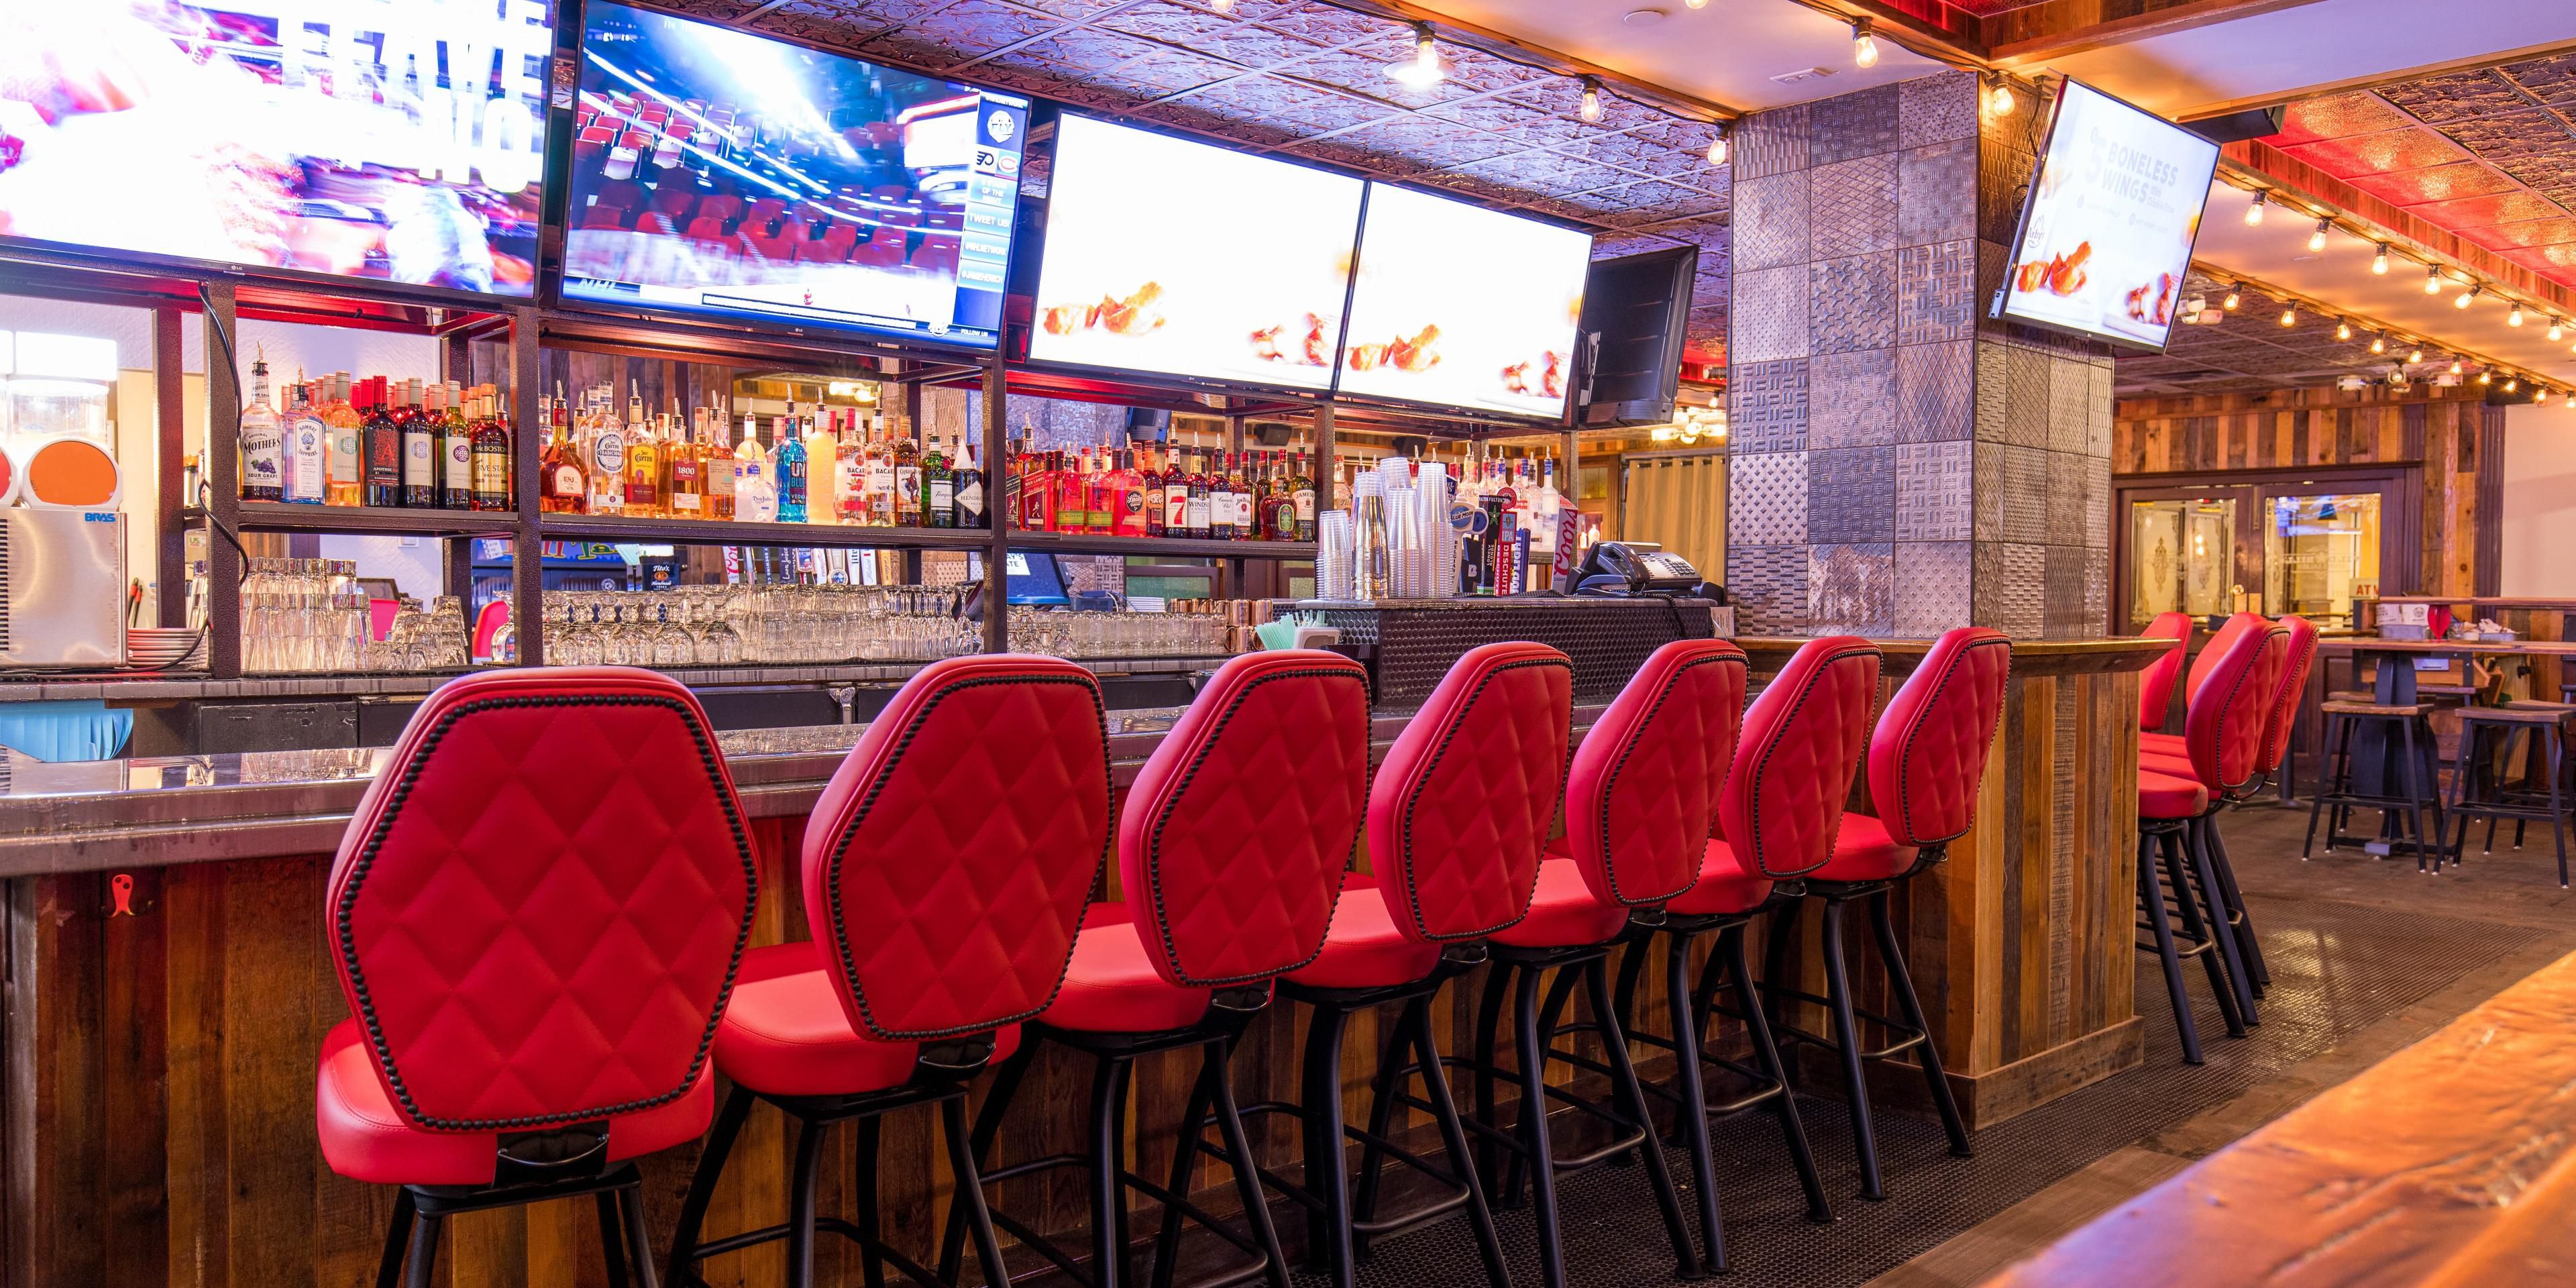 Pull up a seat, and enjoy a drink at Wild Bill's